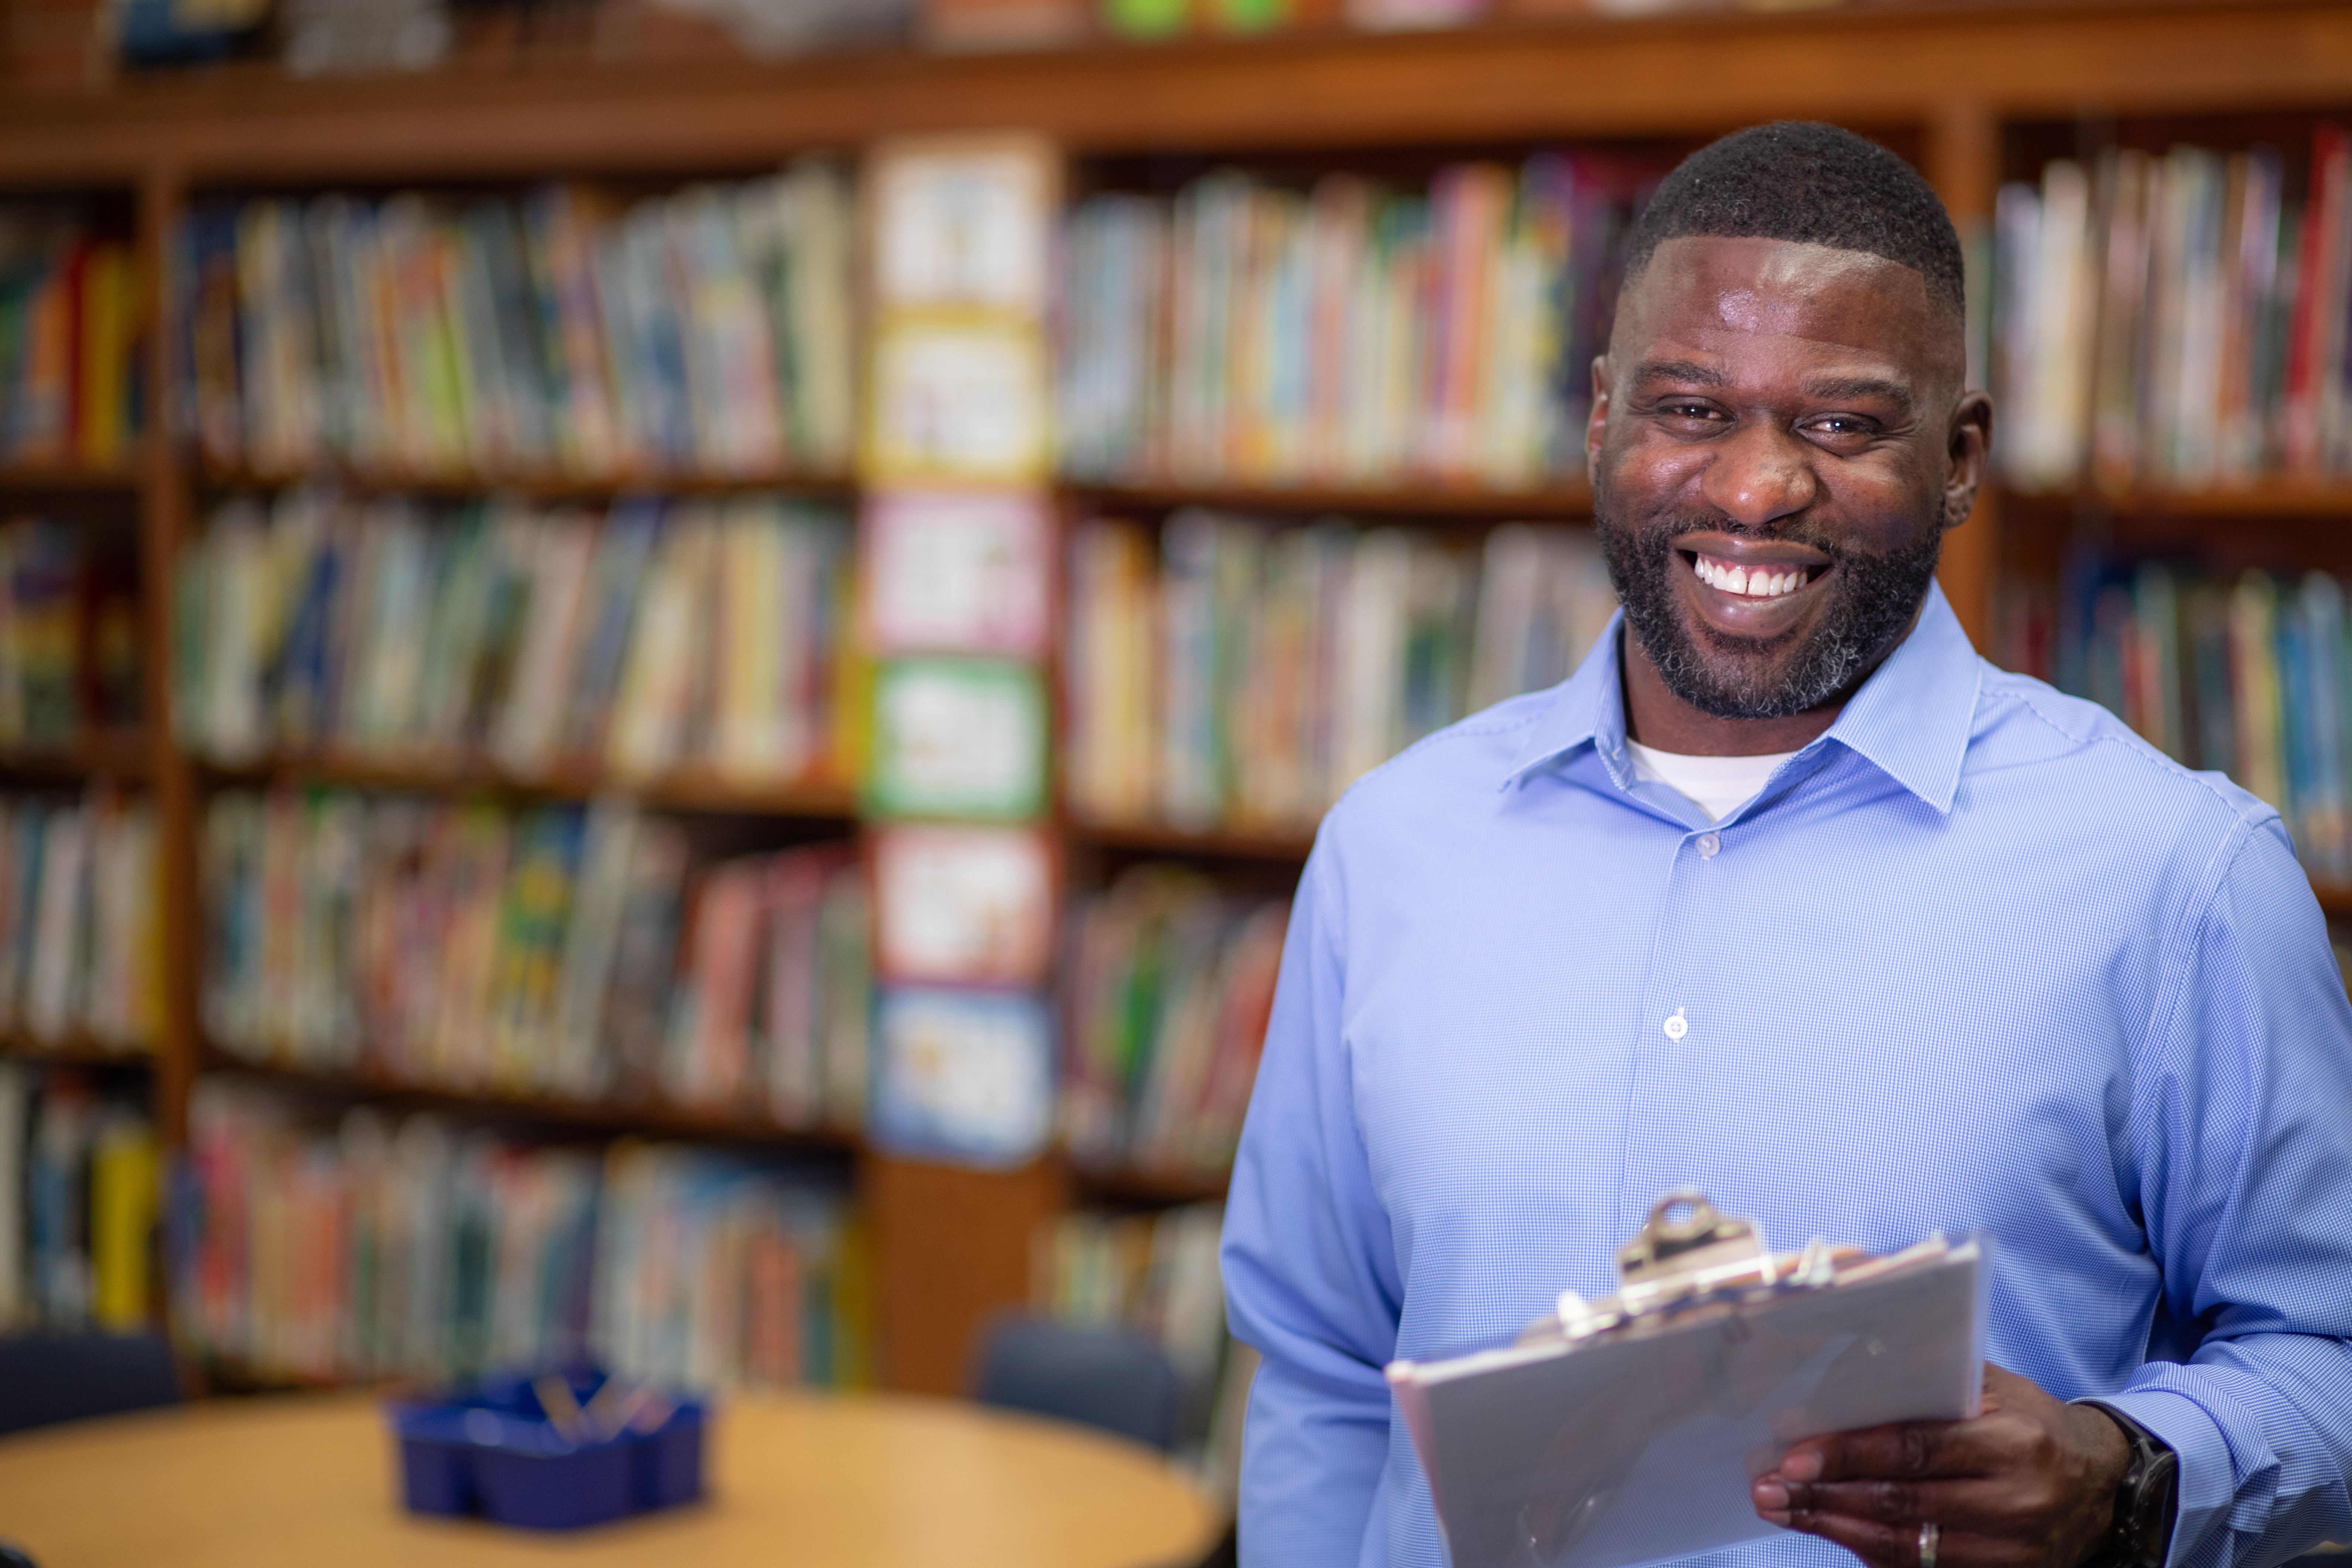 M.Ed. in Educational leadership graduate Kreig Triggs stands in a school library holding a clipboard